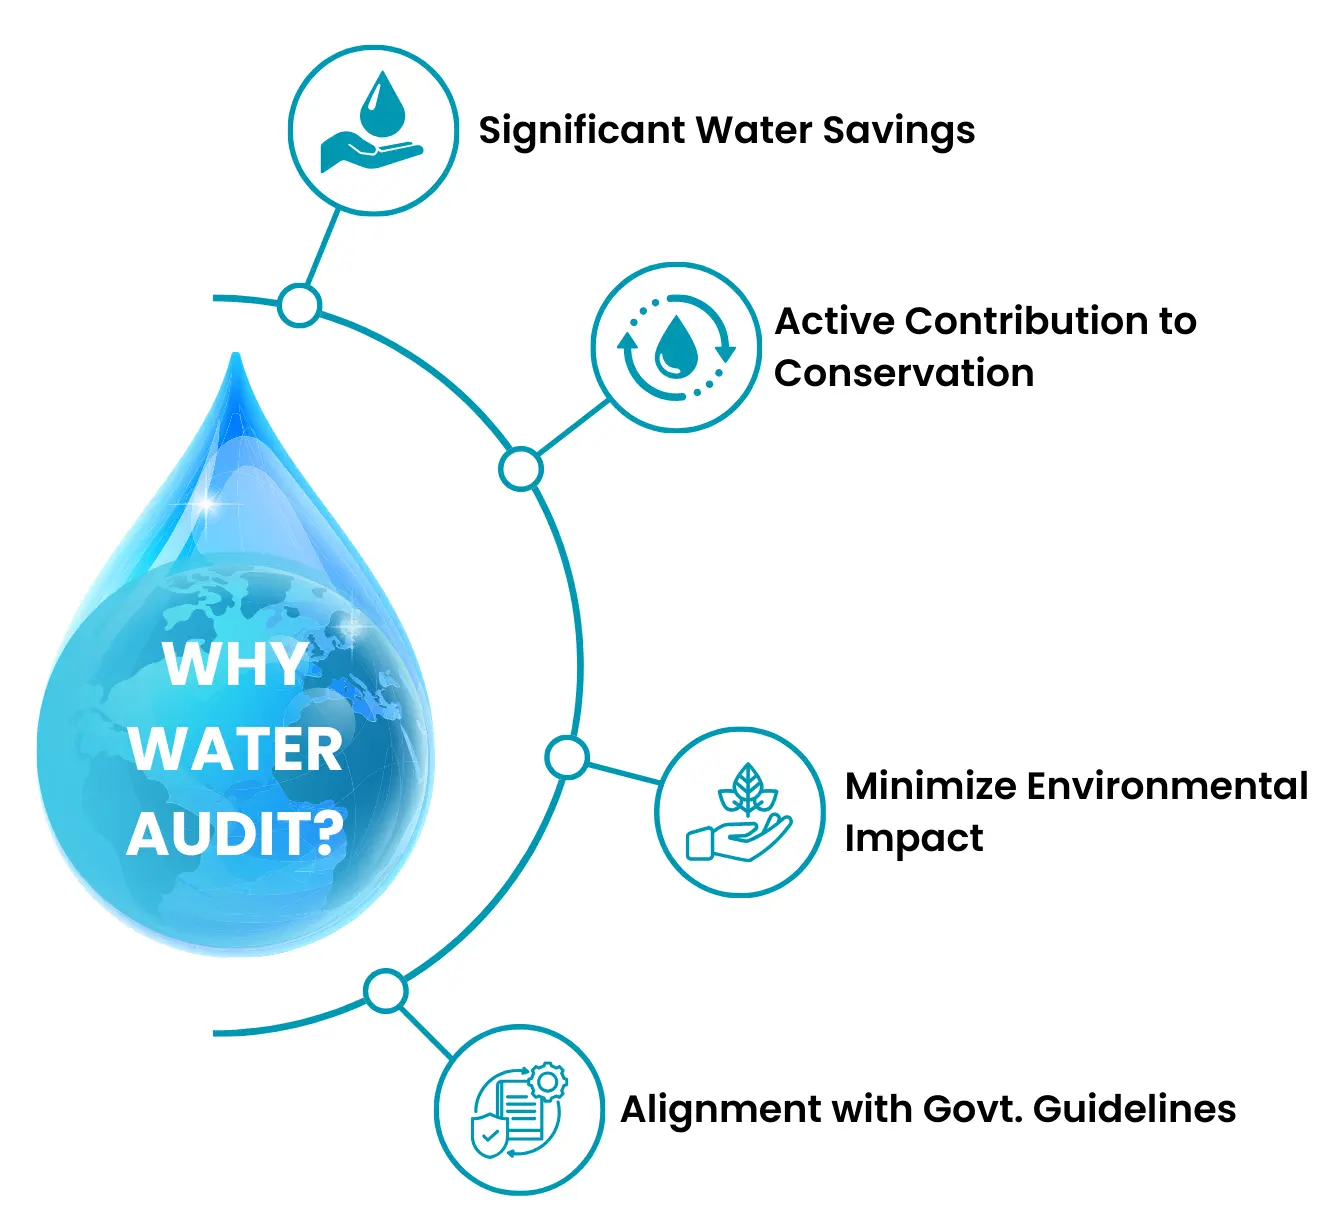 Benefits of Water Auditing